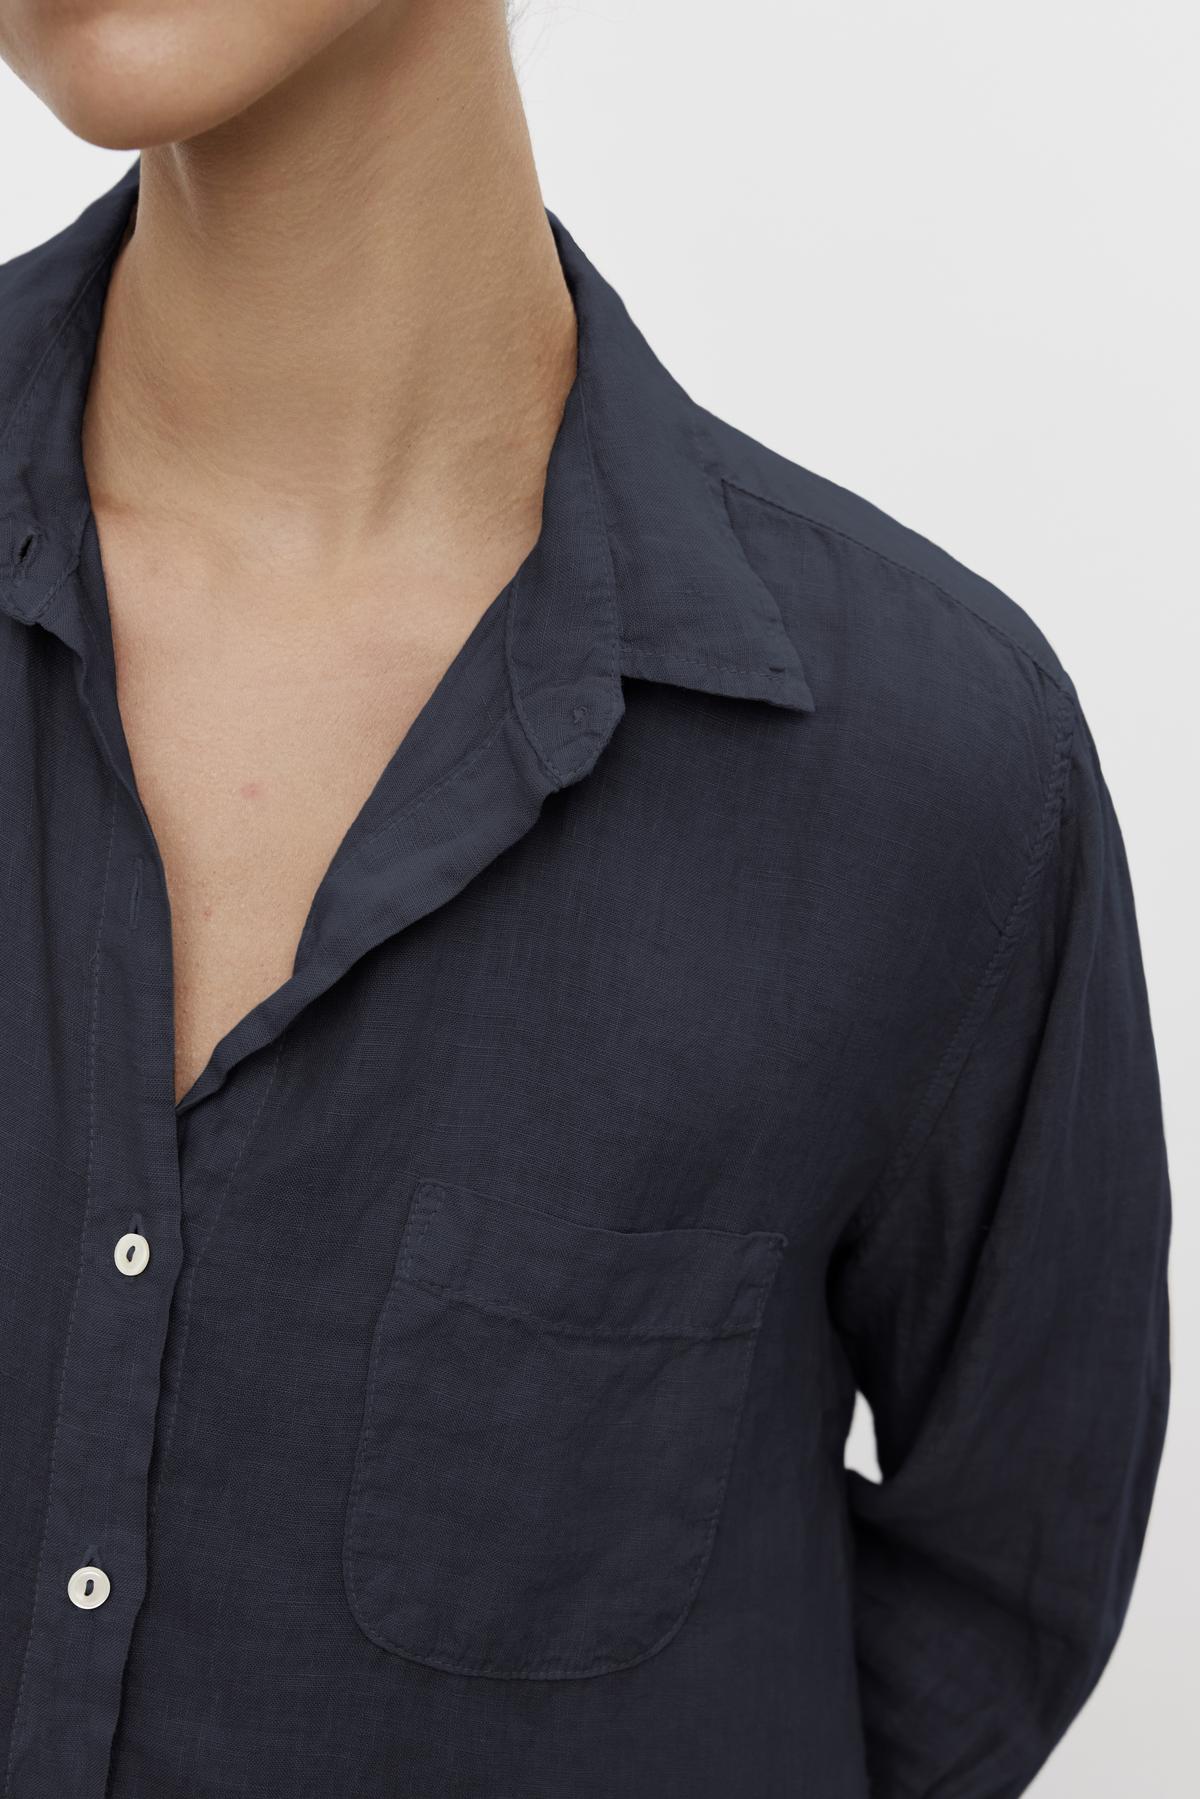   Close-up of a person wearing the MULHOLLAND LINEN SHIRT by Velvet by Jenny Graham, a dark blue linen button-up shirt with a left chest pocket. The shirt collar is slightly open, the sleeves are long, and it features a relaxed silhouette. 